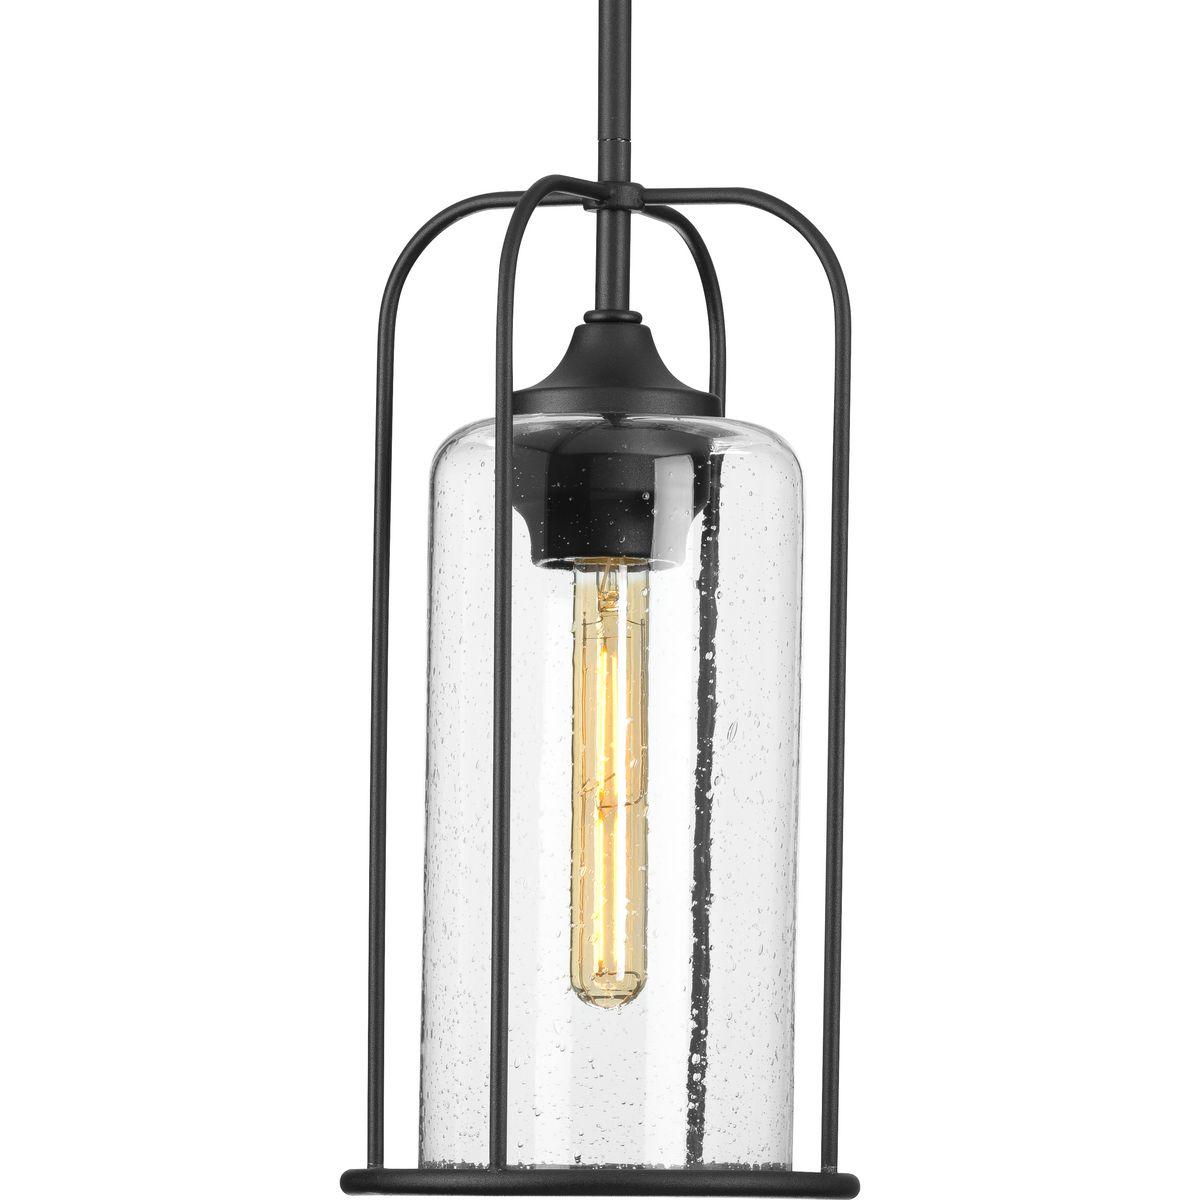 Hubbell P550292-031 Incorporate a timeless style inspired by Victorian-era gaslight fittings with the Watch Hill Collection 1-Light Textured Black Clear Seeded Glass Farmhouse Hanging Pendant Lantern Light. The elongated cage design highlighted by gracefully curving slender 